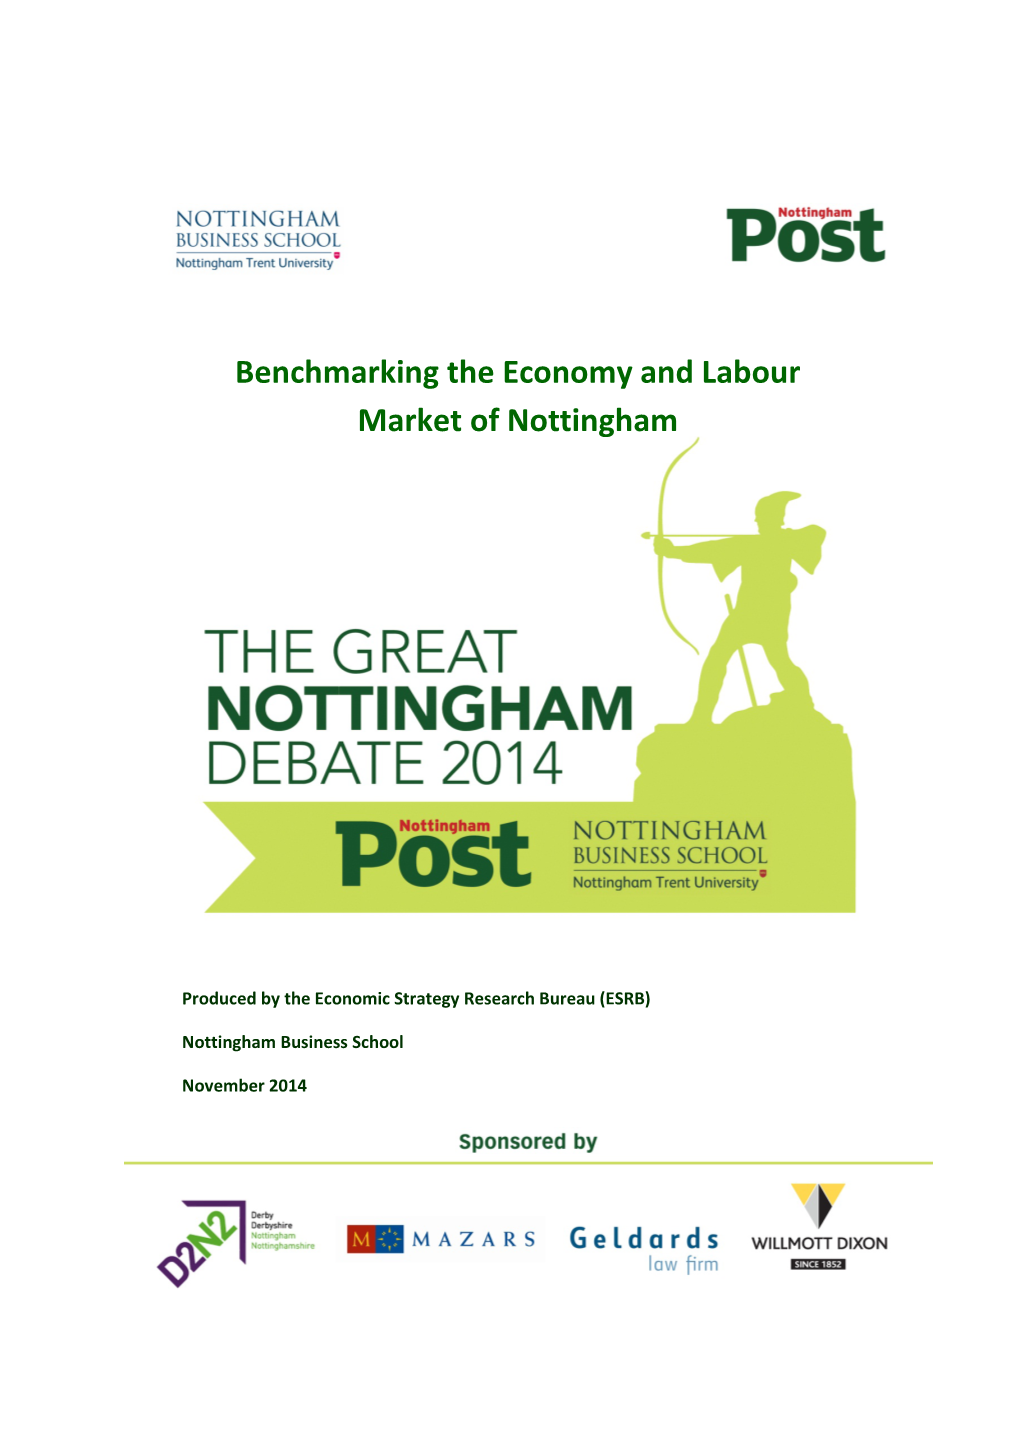 Benchmarking the Economy and Labour Market of Nottingham